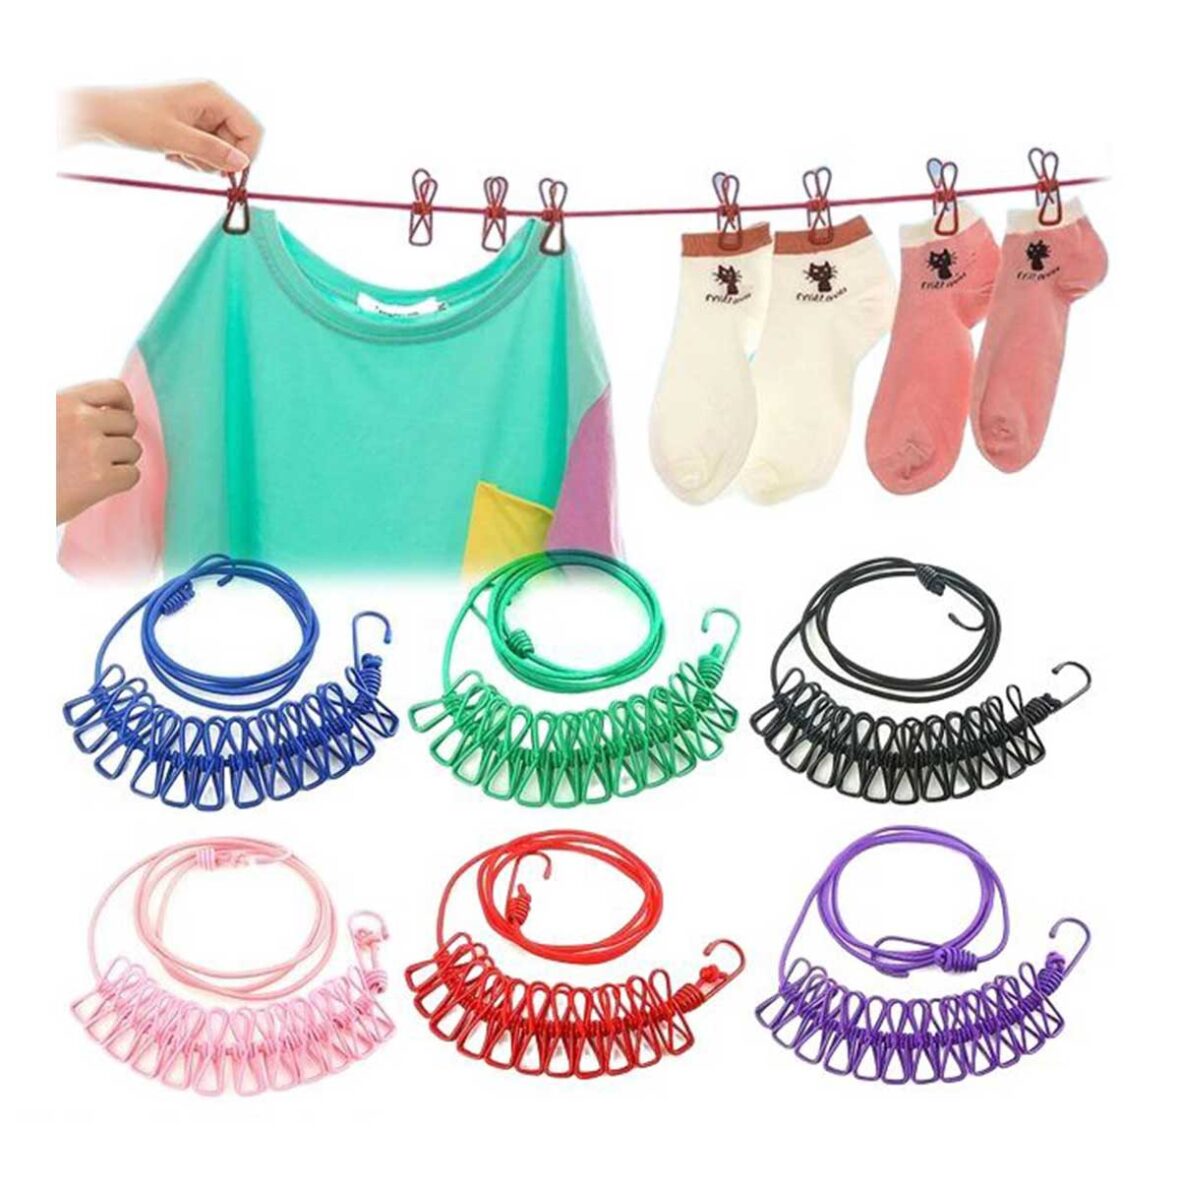 Clothes Rope Drying Rack